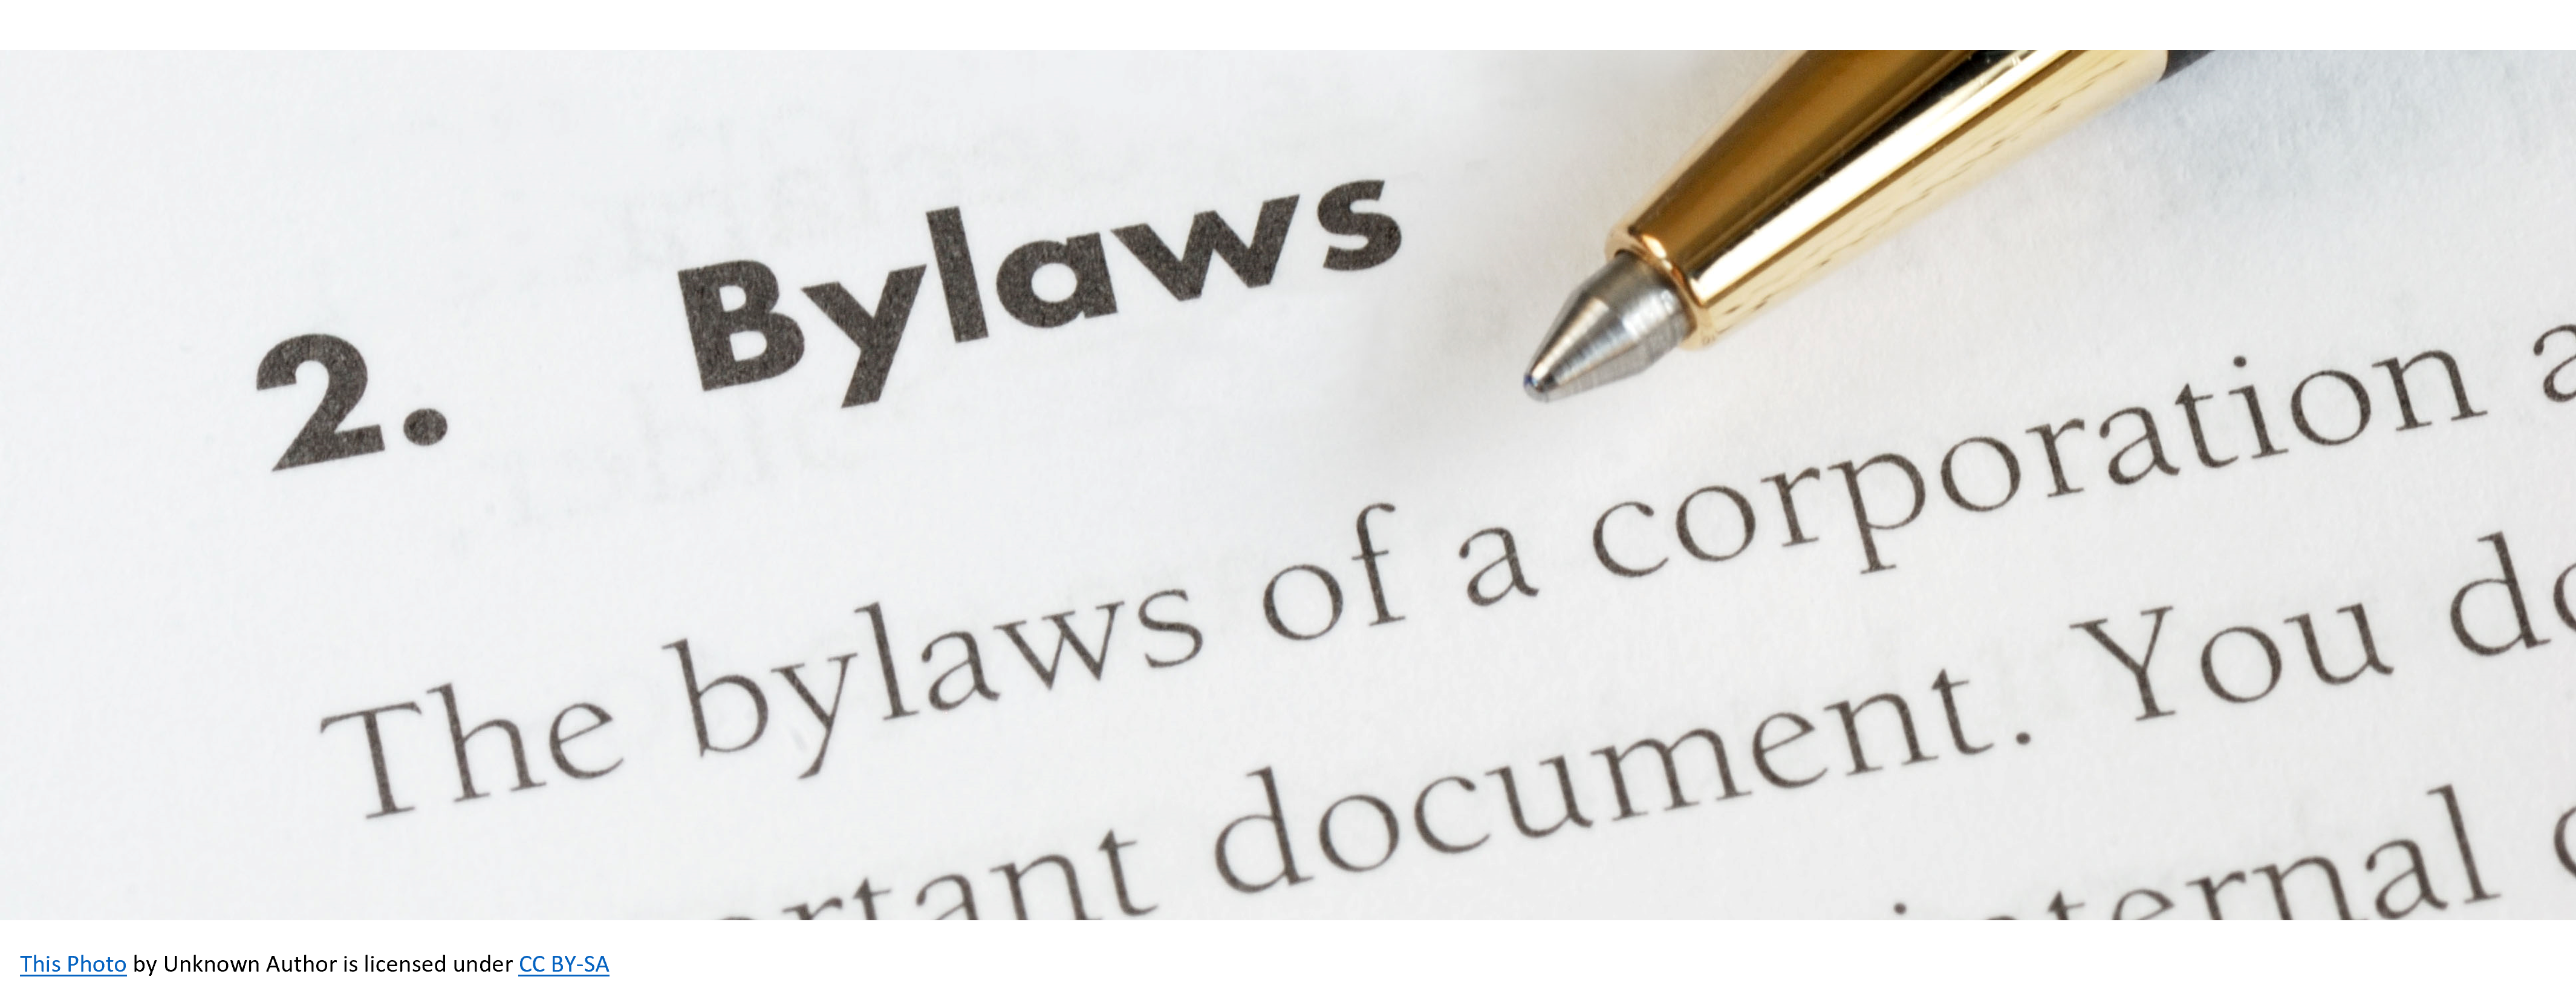 Image of bylaws